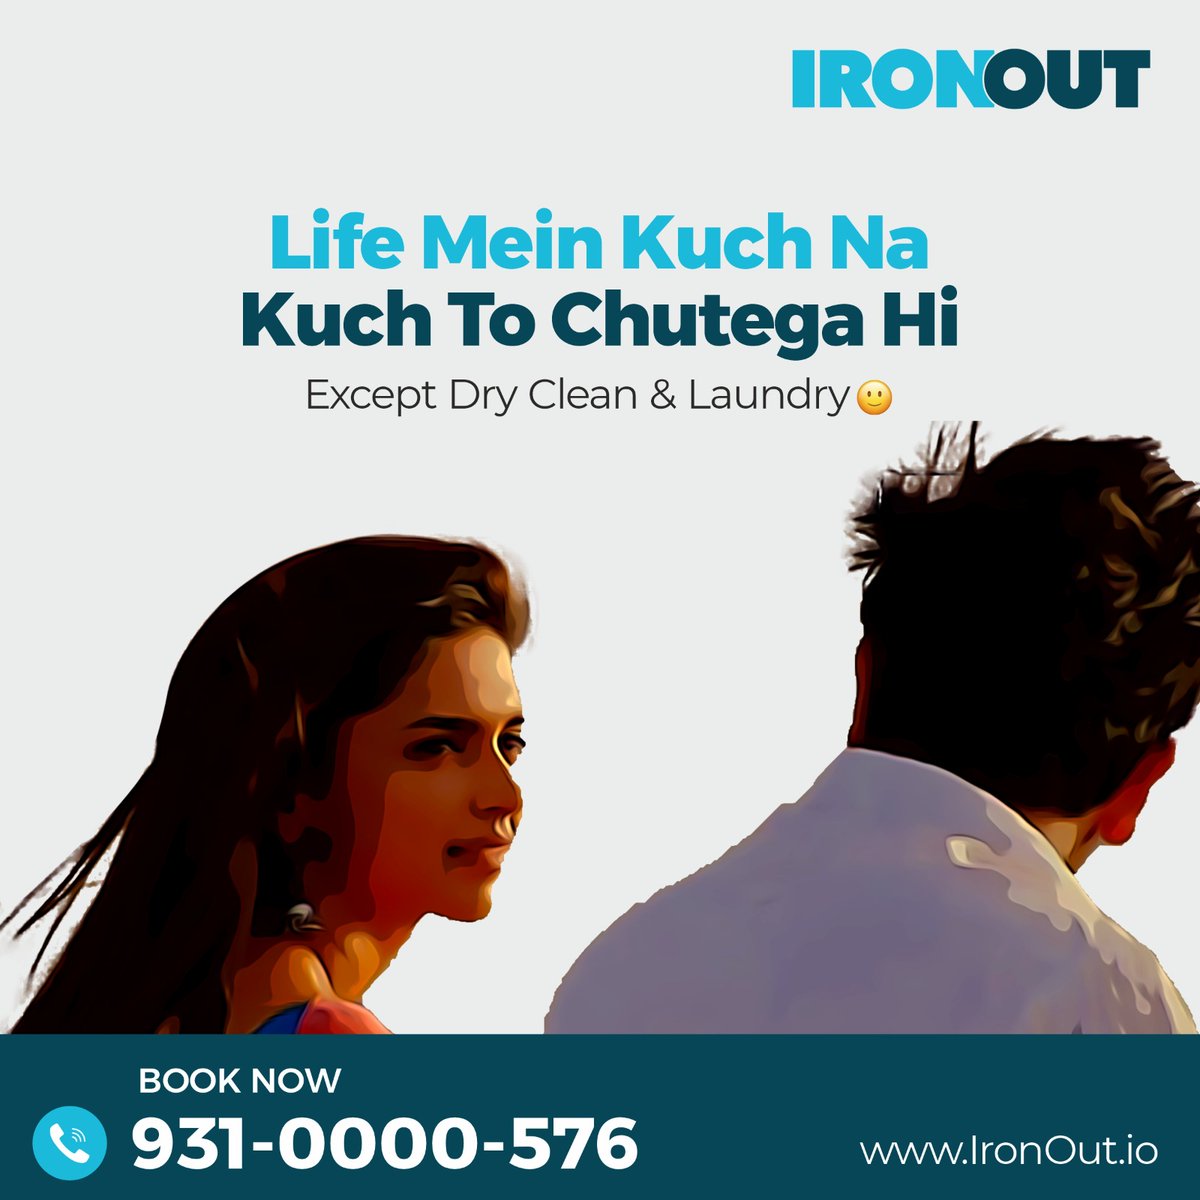 Life mein important cheezein mat chhodho, dry
cleaning or laundry hum pe chhodh do.
Call Now: 9310000576
Click the link in the bio and download the IronOut
App!
.
#IronOut #IronOutofficial #Yehjawanihaidiwani
#Movierelatable #drycleaning
#professionaldrycleaning #premiumcleaning